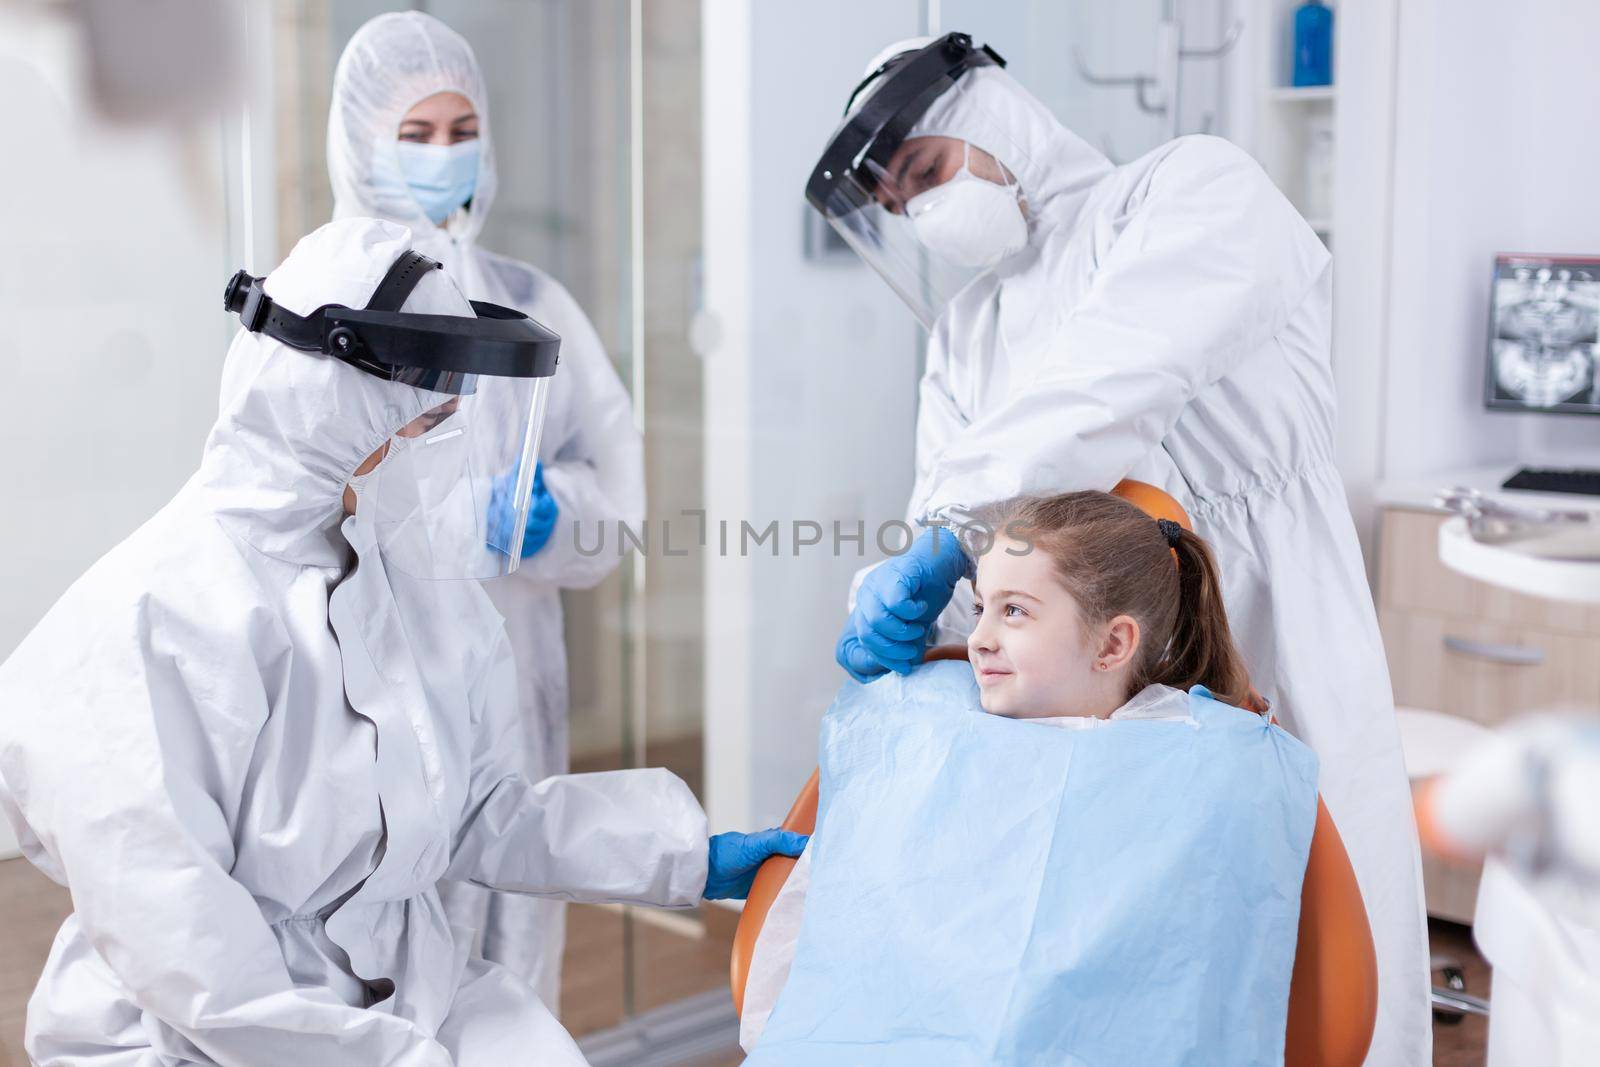 Smilling little girl in the course of dental examination dressed in coverall because of coronavirus pandemic. Stomatologist during covid19 wearing ppe suit doing teeth procedure of child sitting on chair.